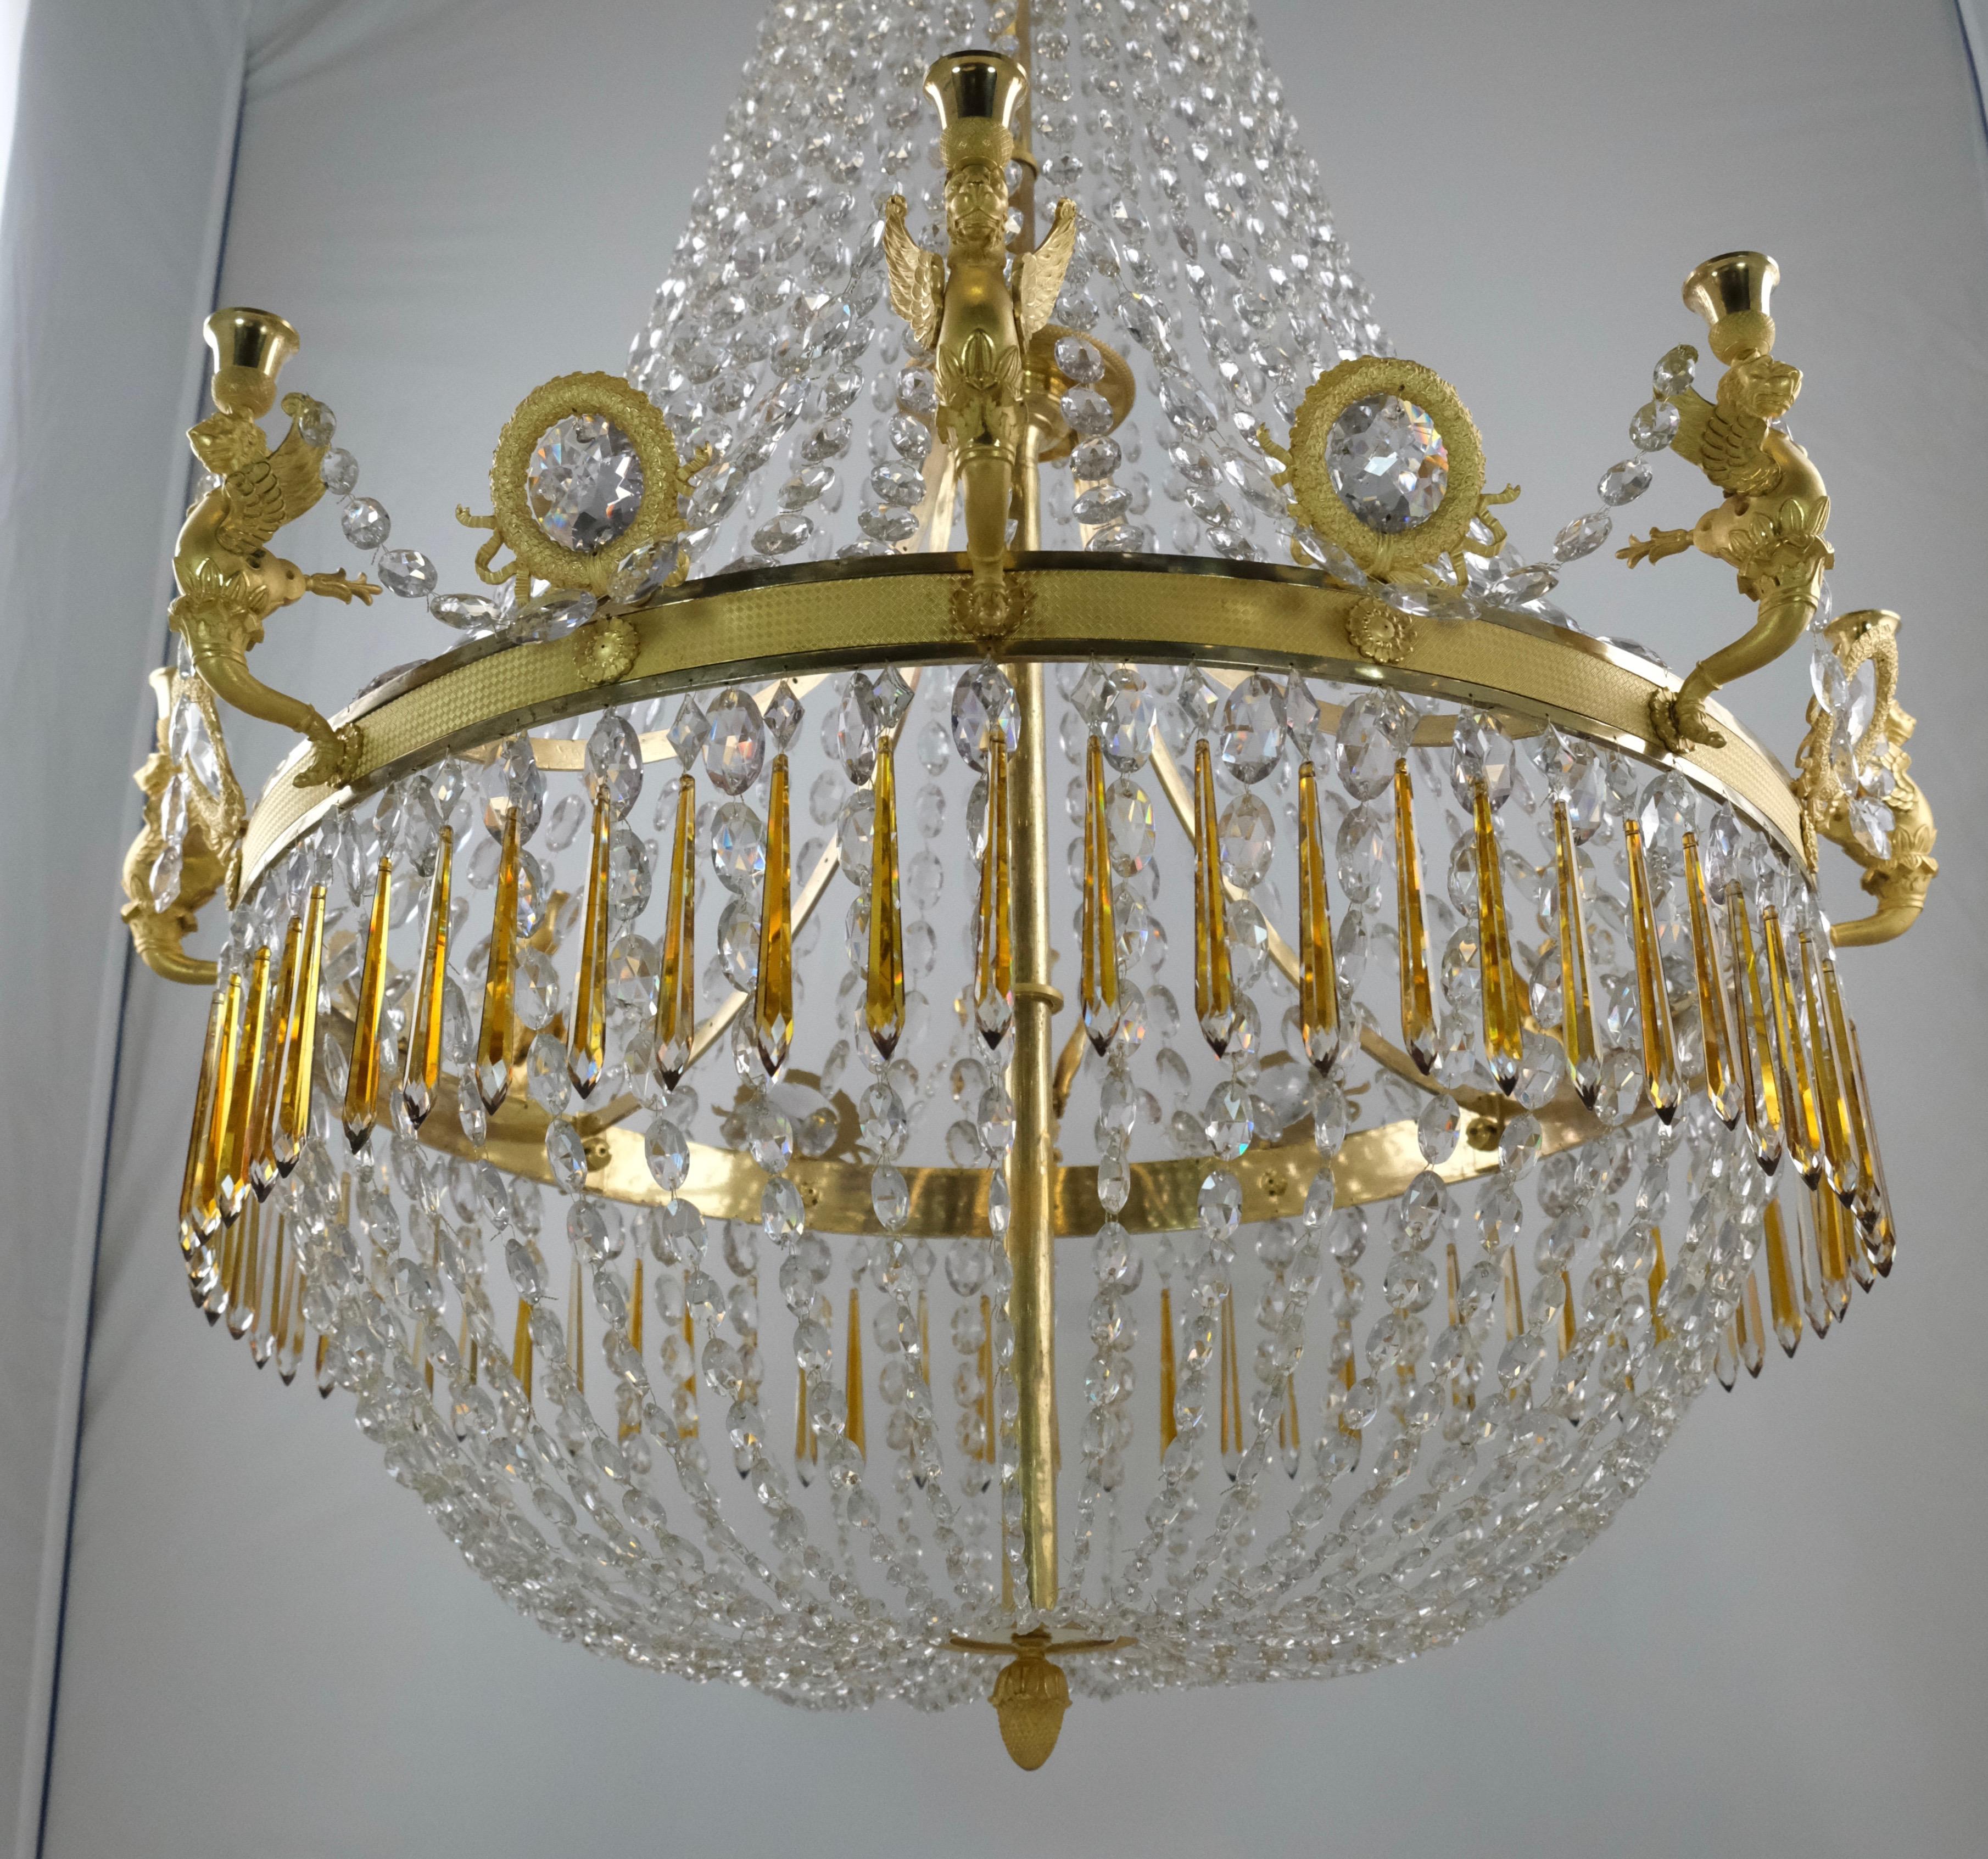 A fantastic large Empire chandelier. Made of gilt bronze of the highest quality both to the casting, the enchasing, the gilding and especially the design with the amazing large arms shaped as bewinged lions. This type of early empire chandeliers are